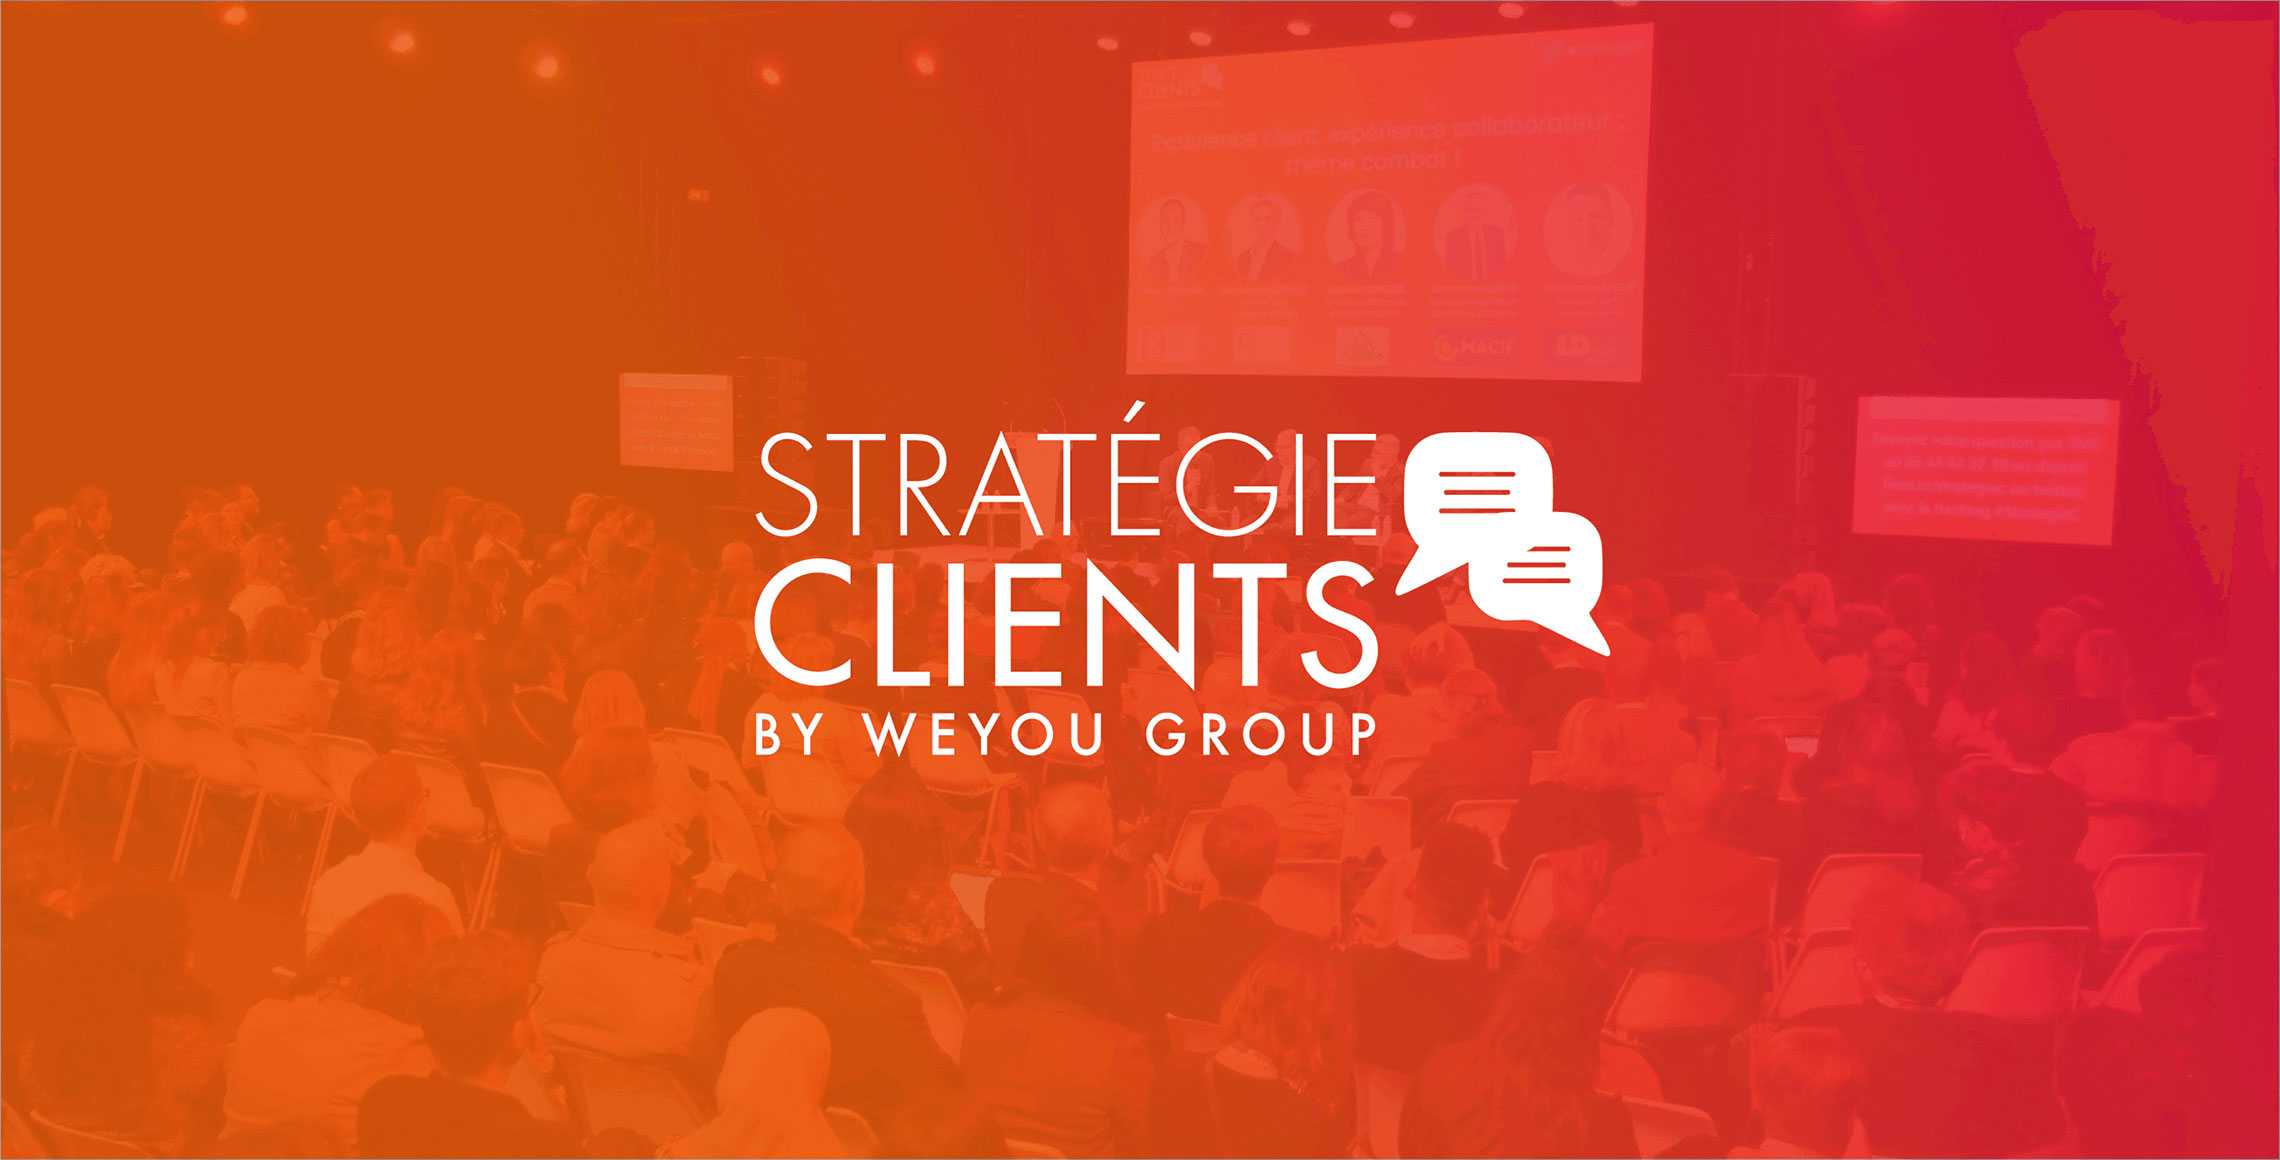 Strategie Clients By Weyou Group